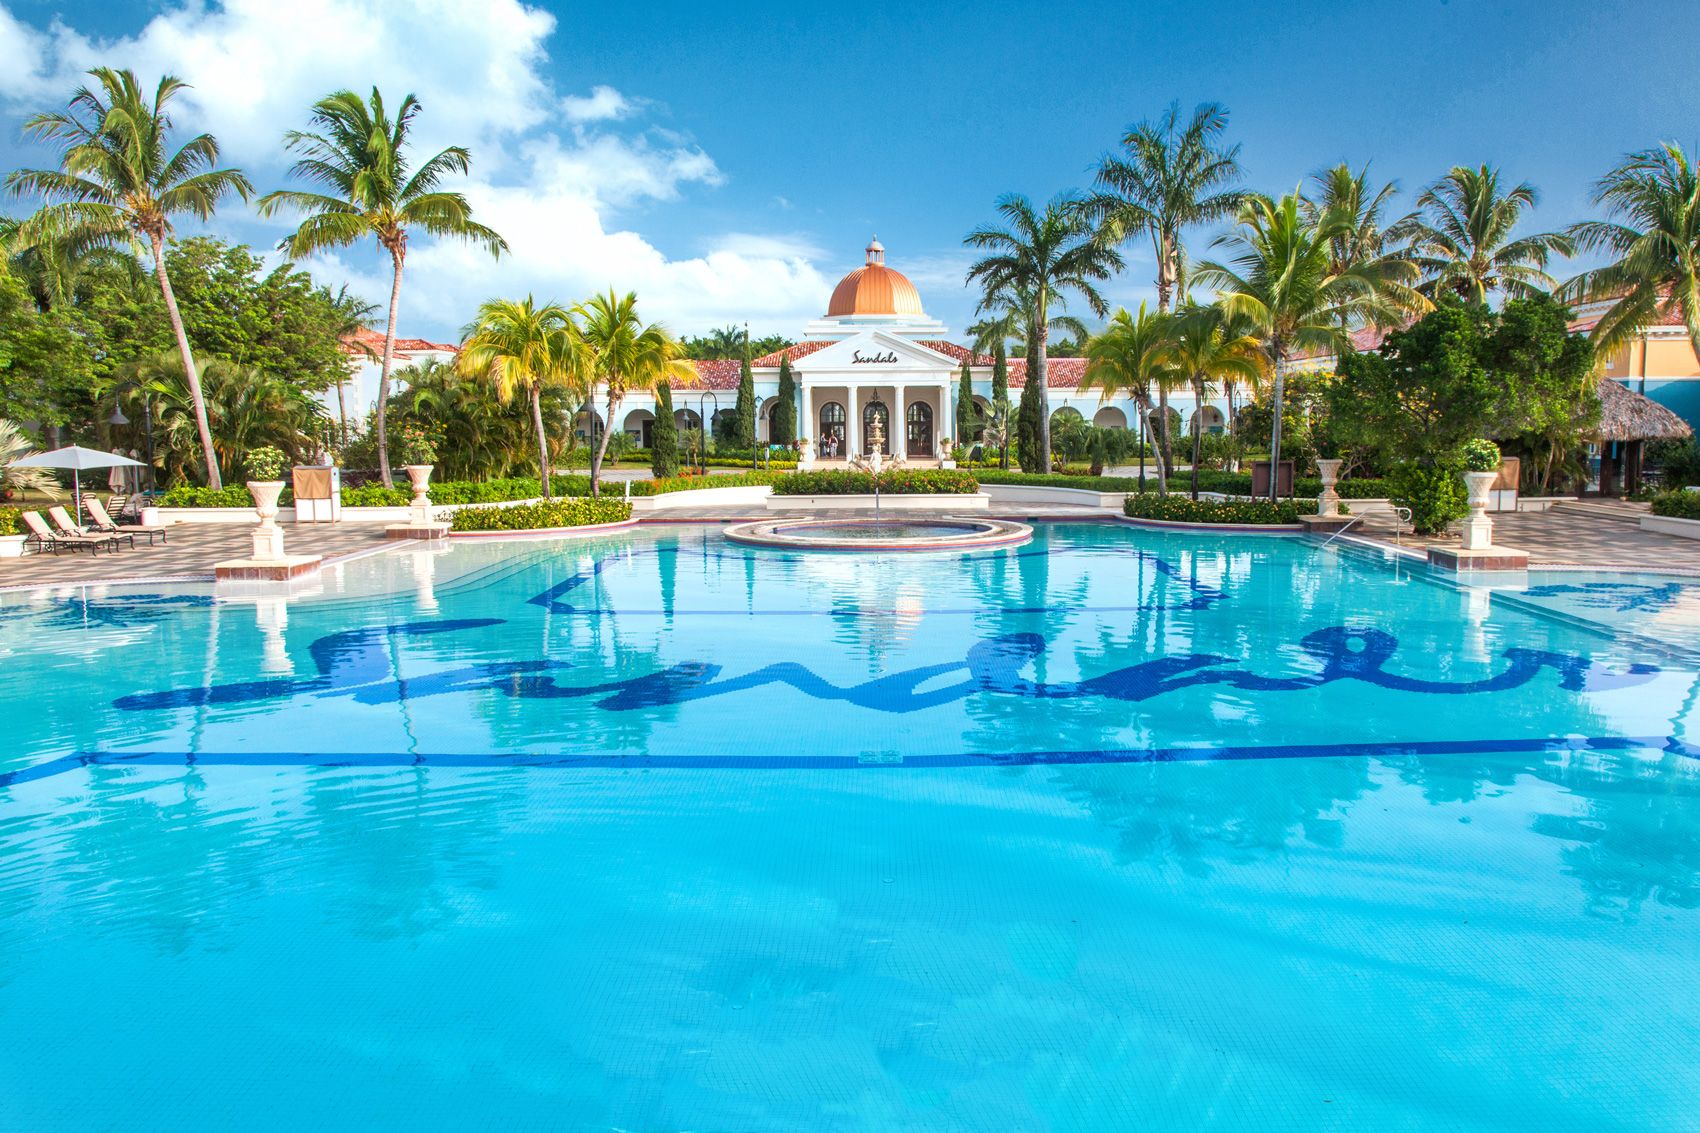 FULL REVIEW: What Guests Love About Sandals South Coast